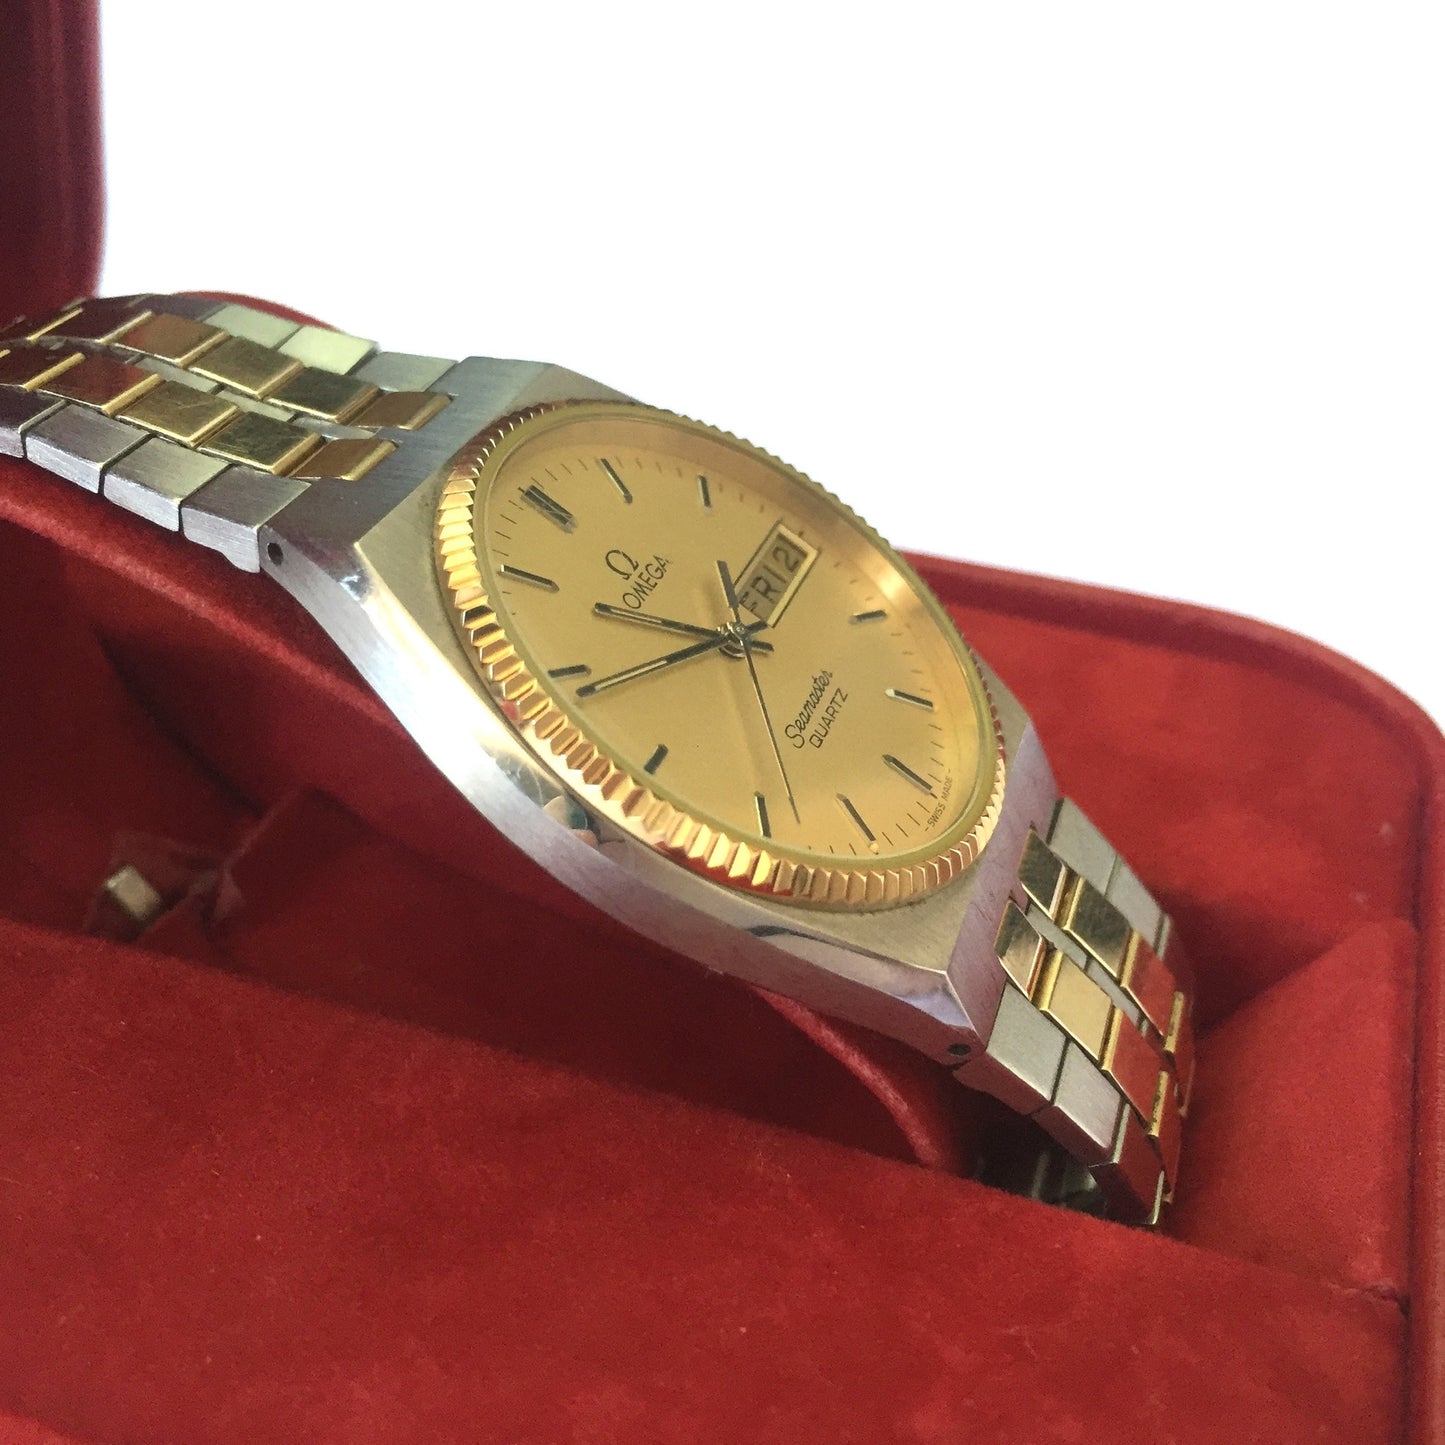 Omega - Seamaster Day-Date 18K/SS Watch